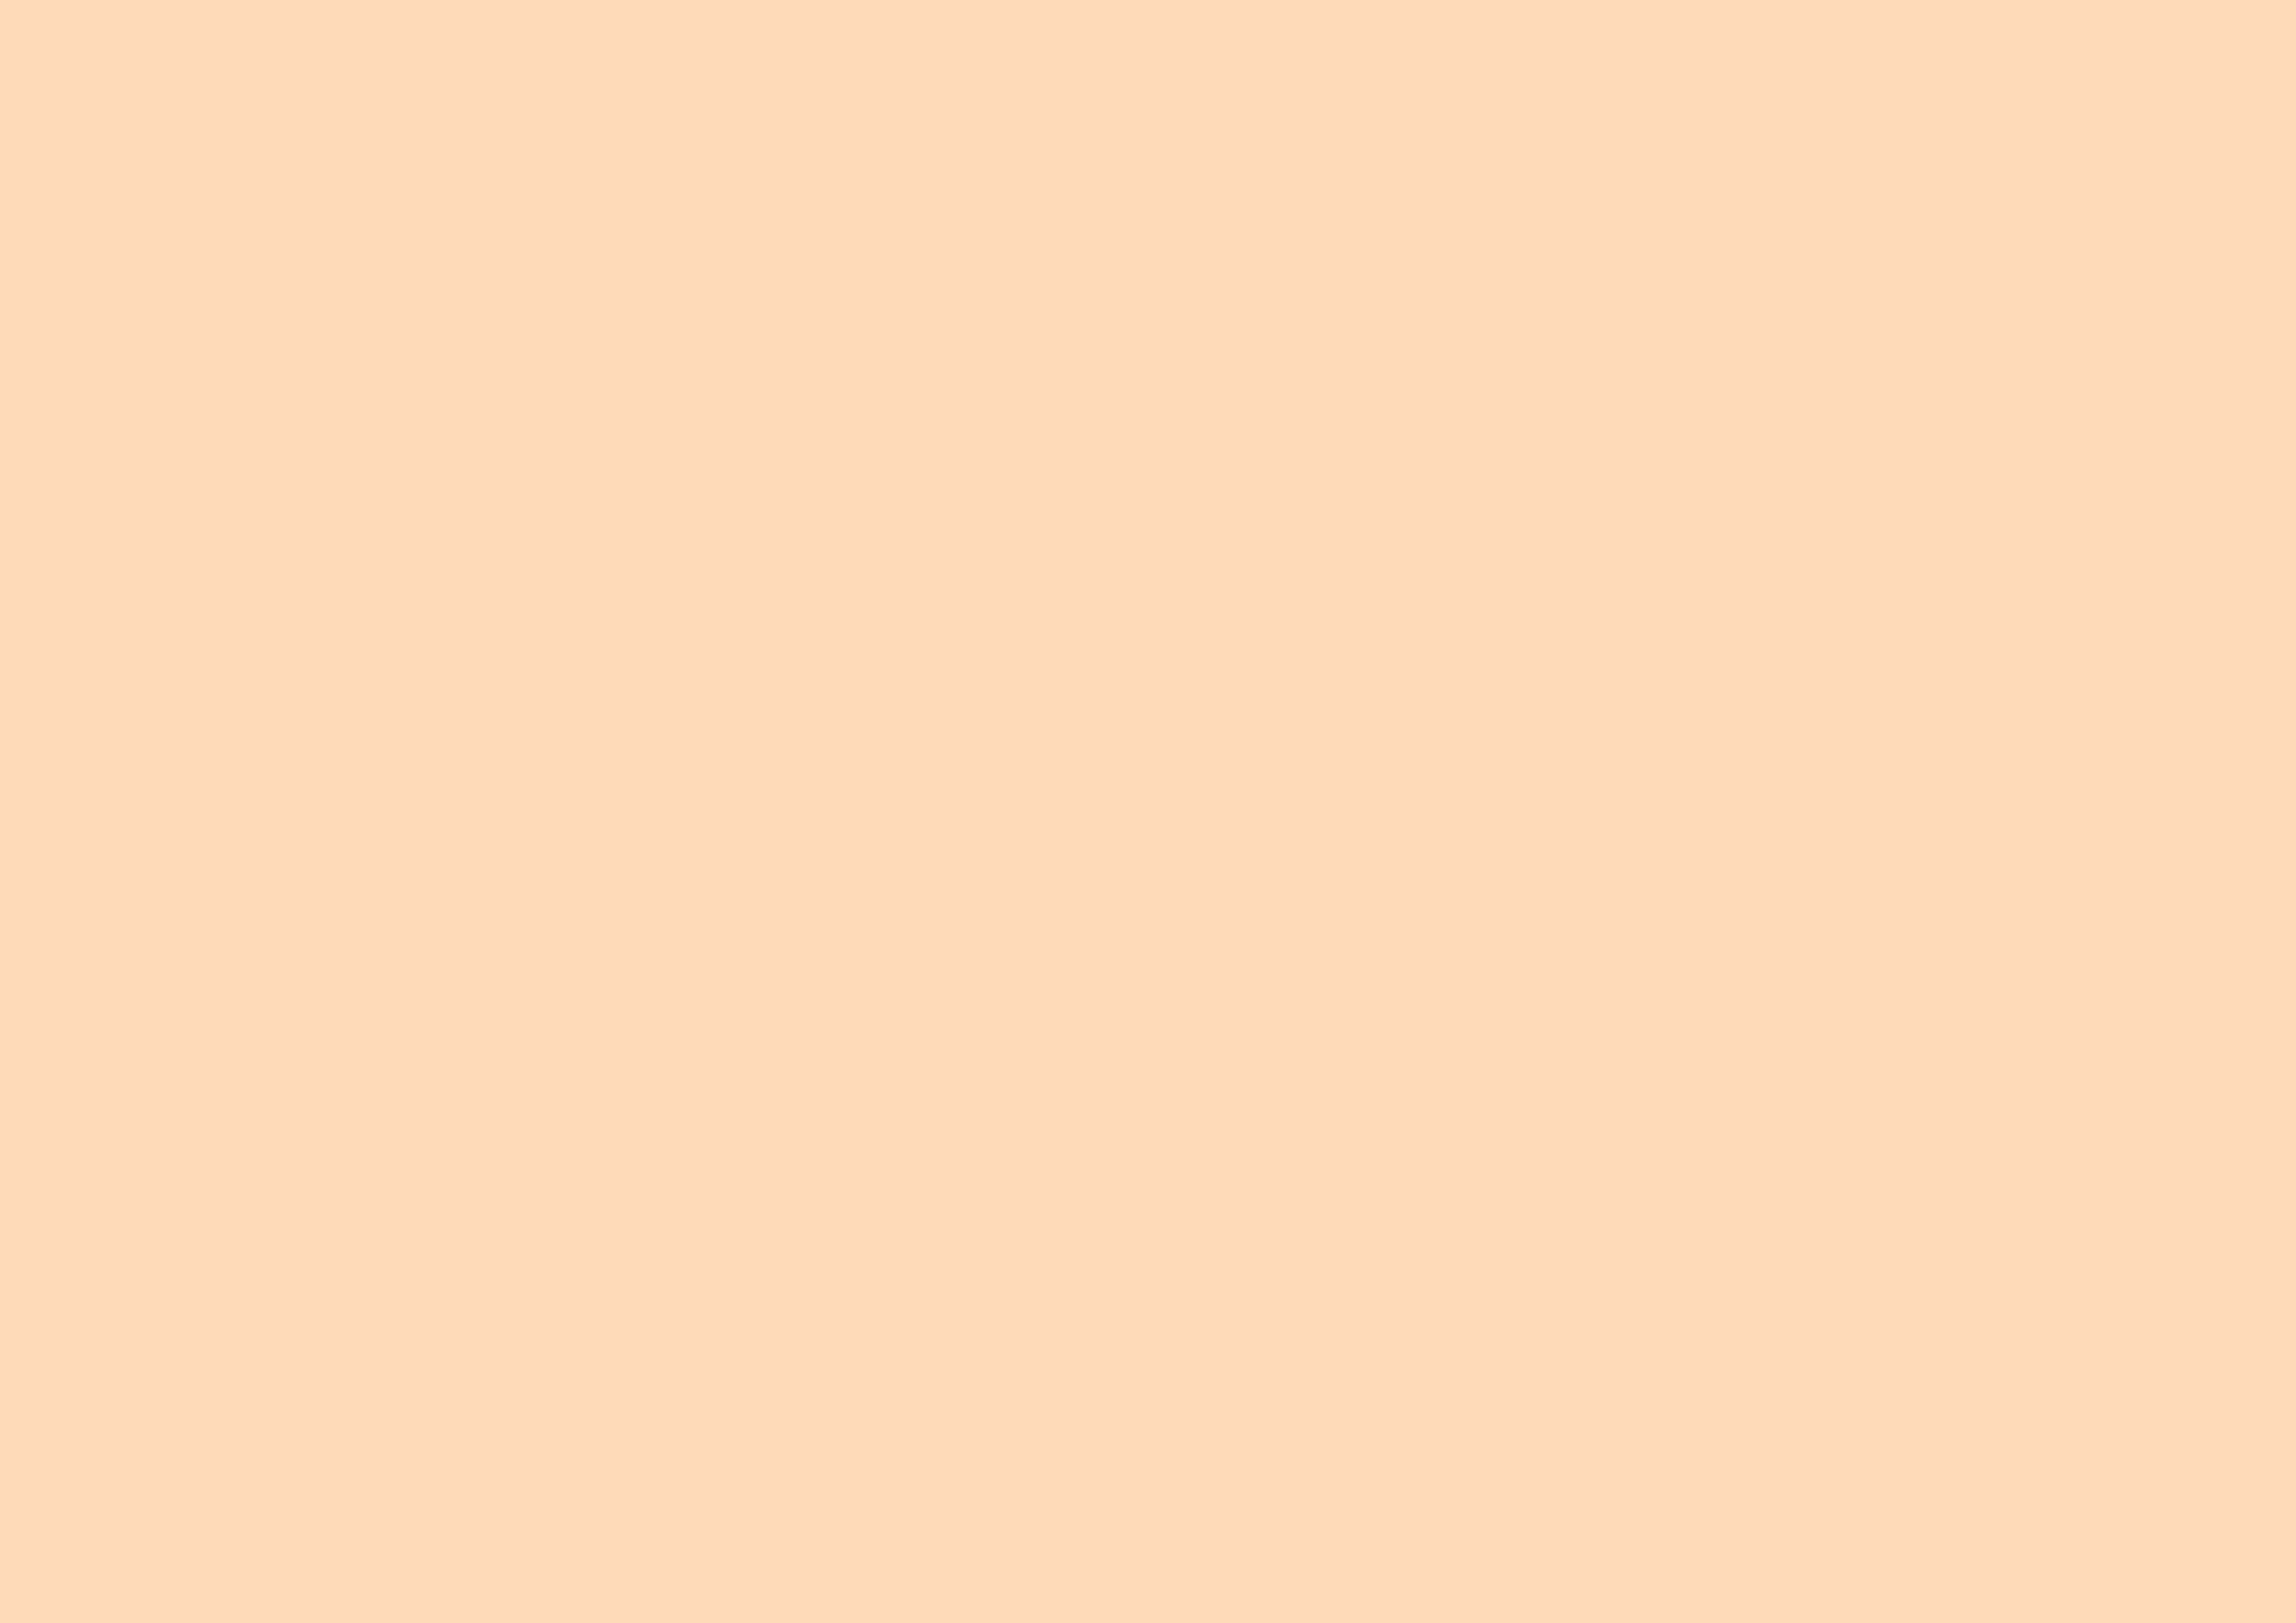 3508x2480 Peach Puff Solid Color Background